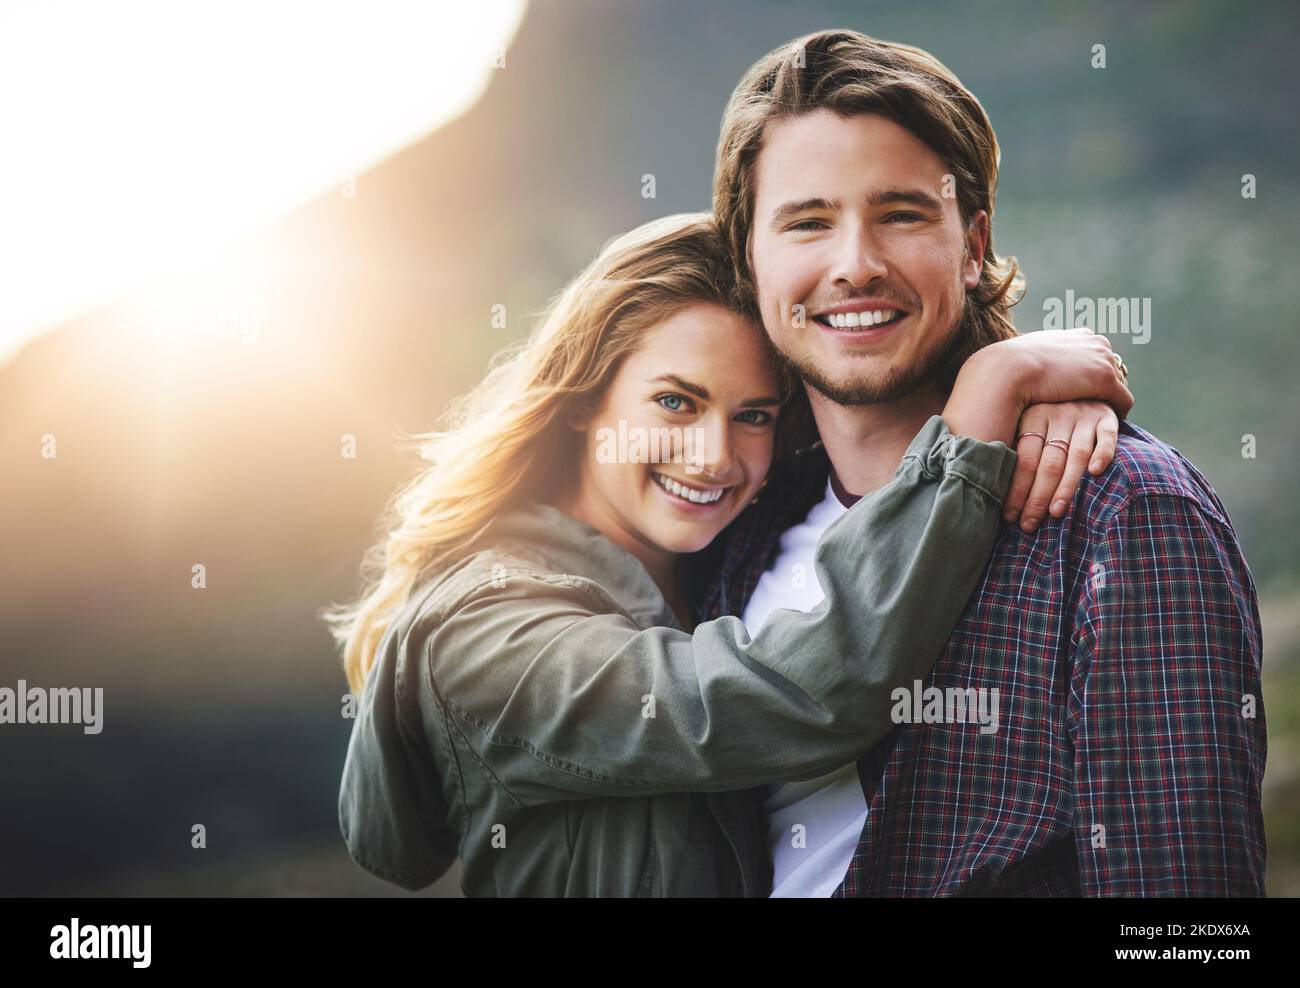 Love in the great outdoors. Portrait of a happy young couple having fun outside. Stock Photo